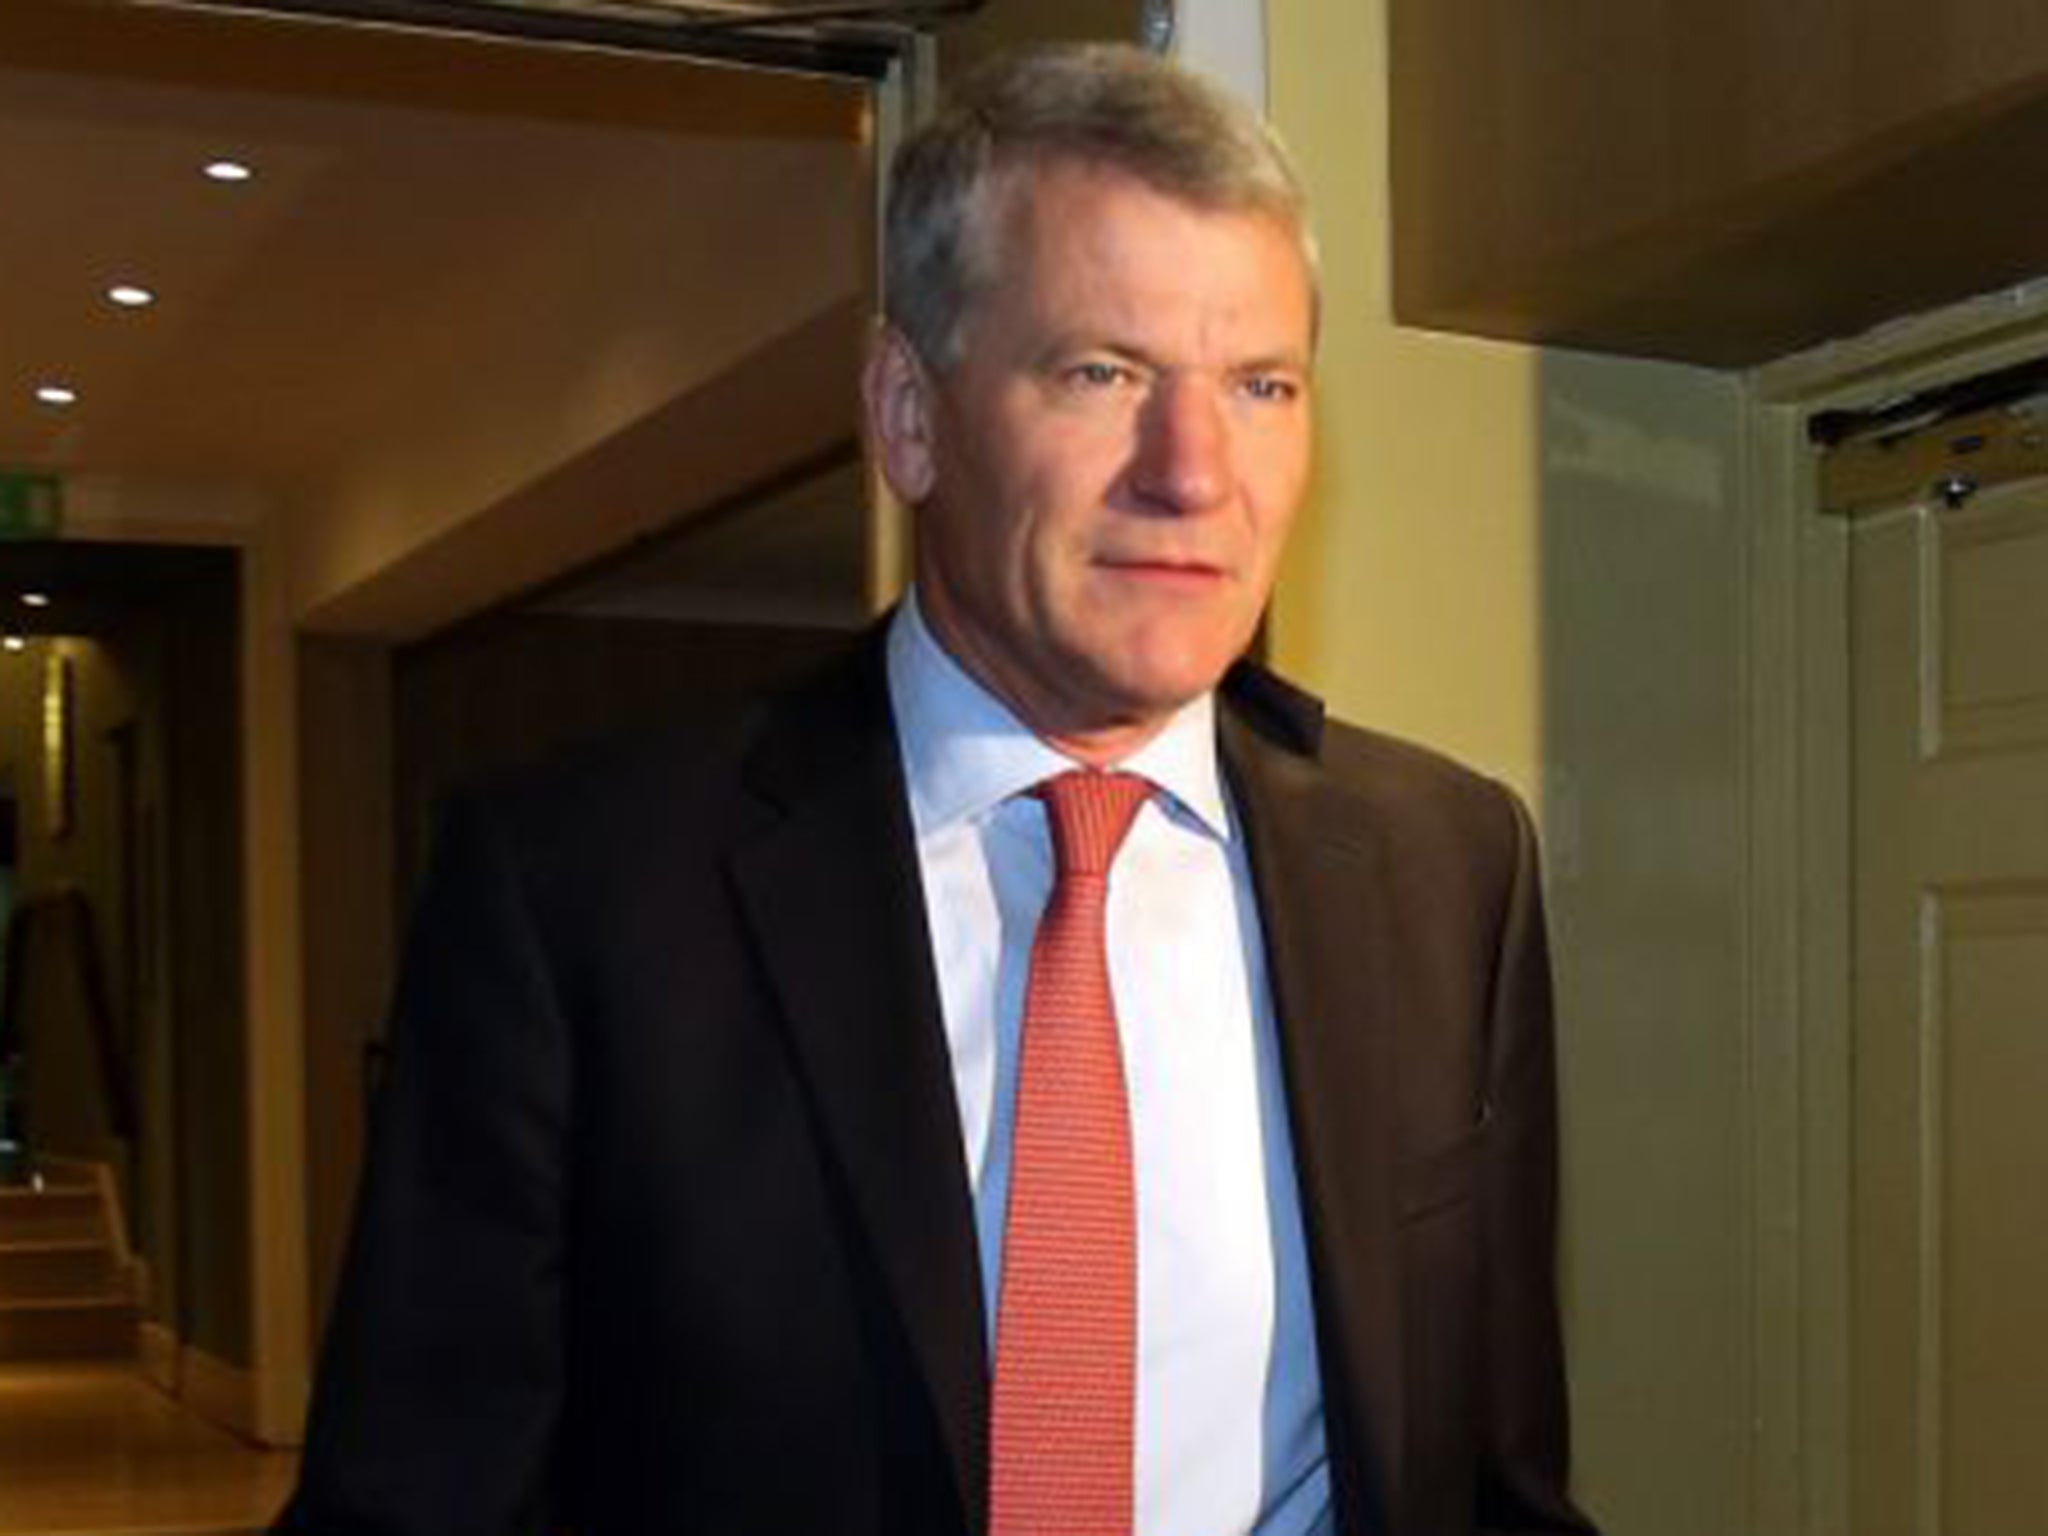 David Gill, the FA vice-chairman, is standing against Welsh FA president Trefor Lloyd Hughes and is expected to win easily